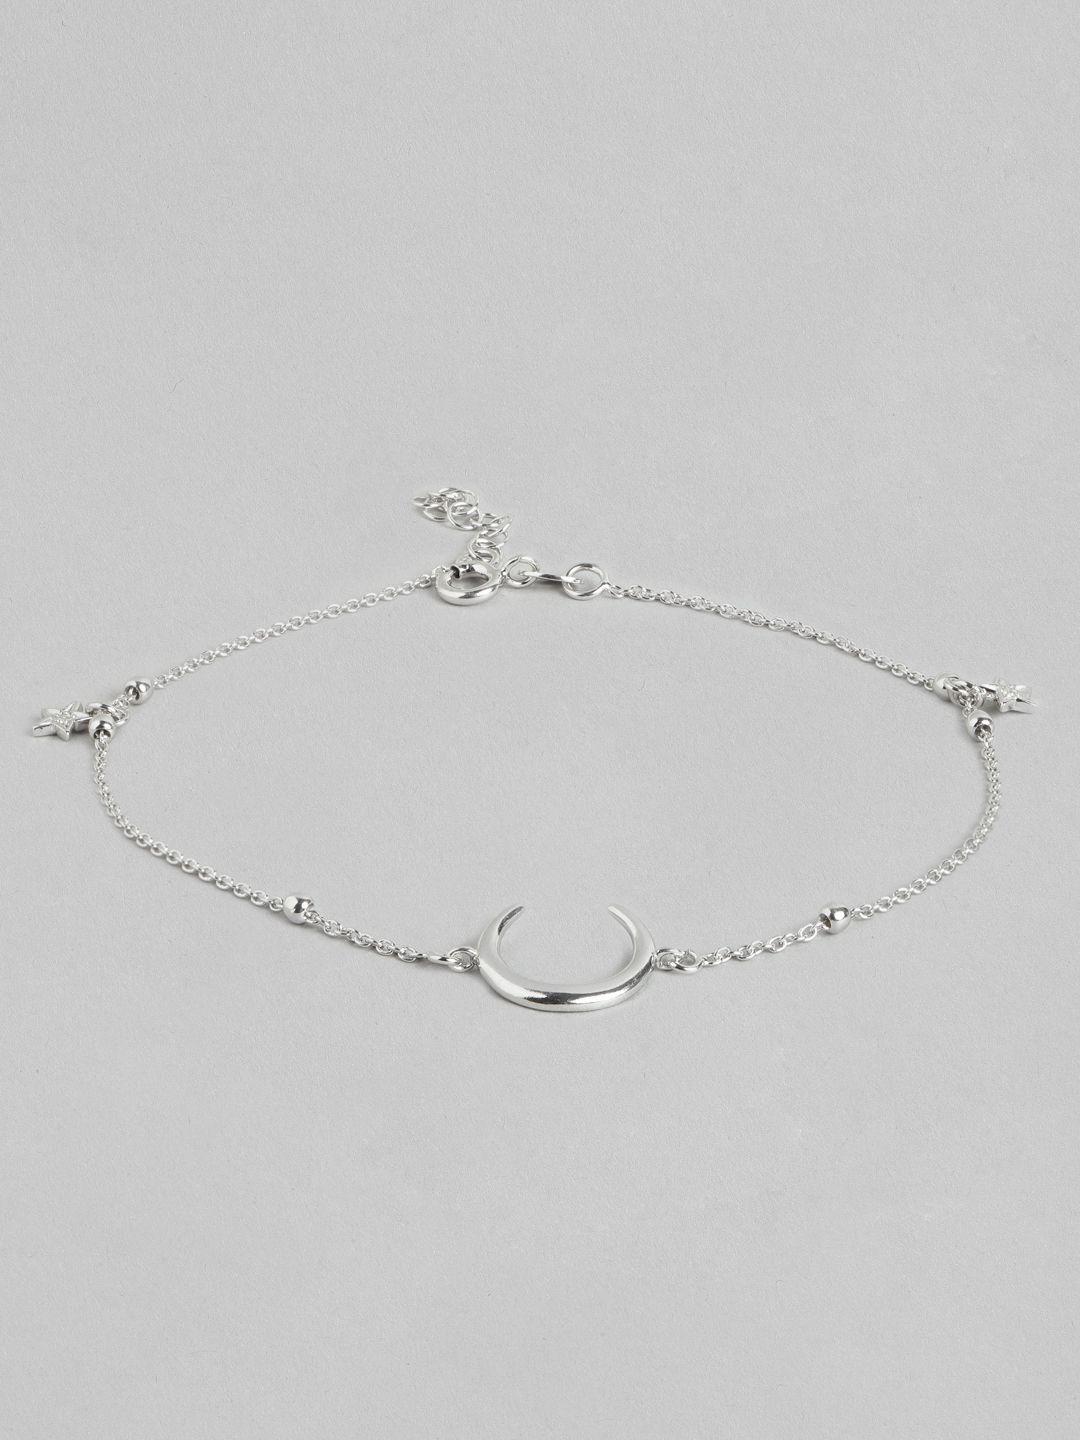 carlton london 925 sterling silver moon rhodium plated adjustable charm anklet